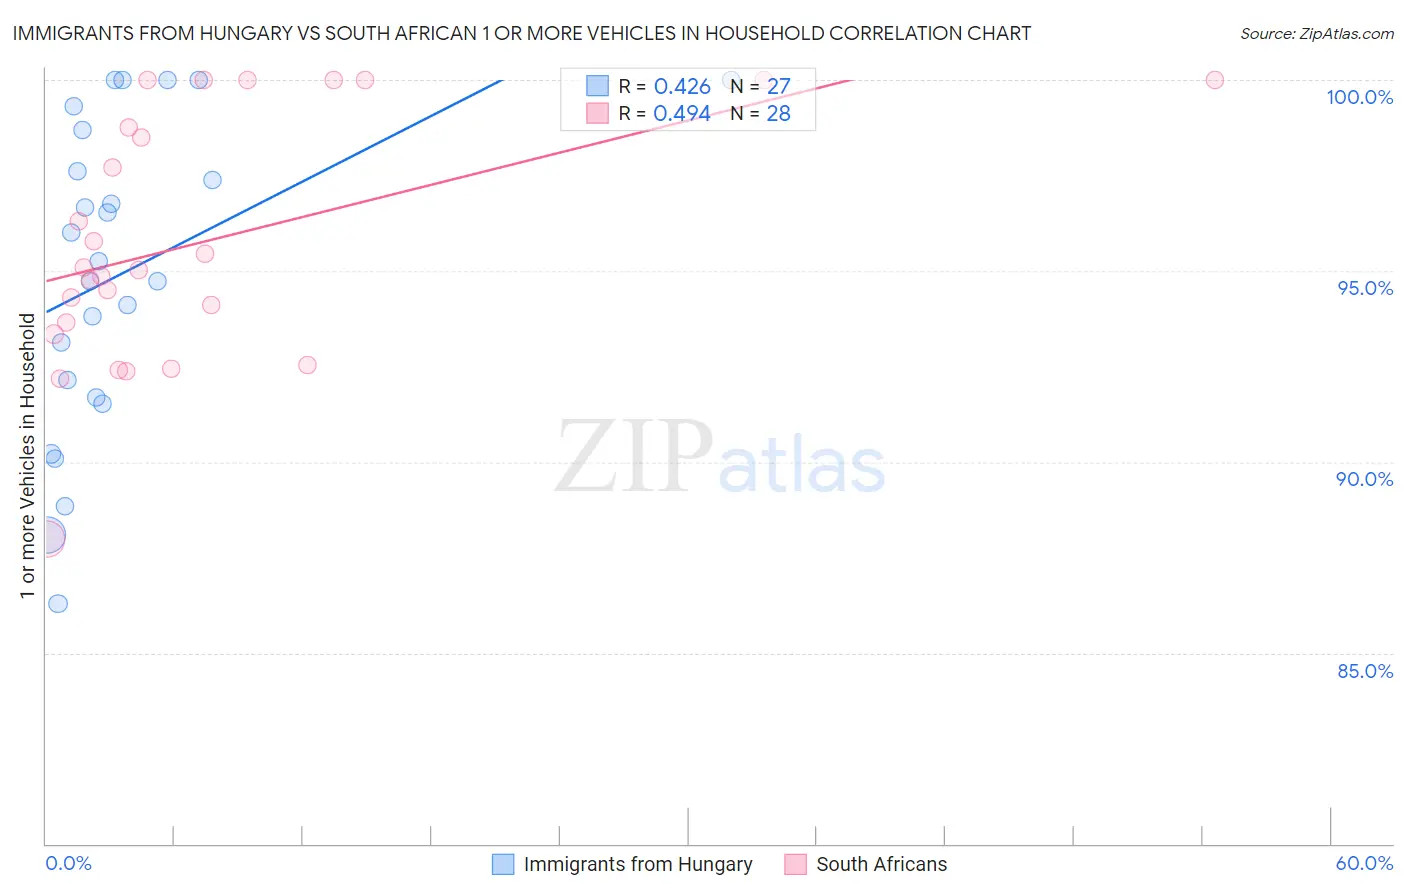 Immigrants from Hungary vs South African 1 or more Vehicles in Household